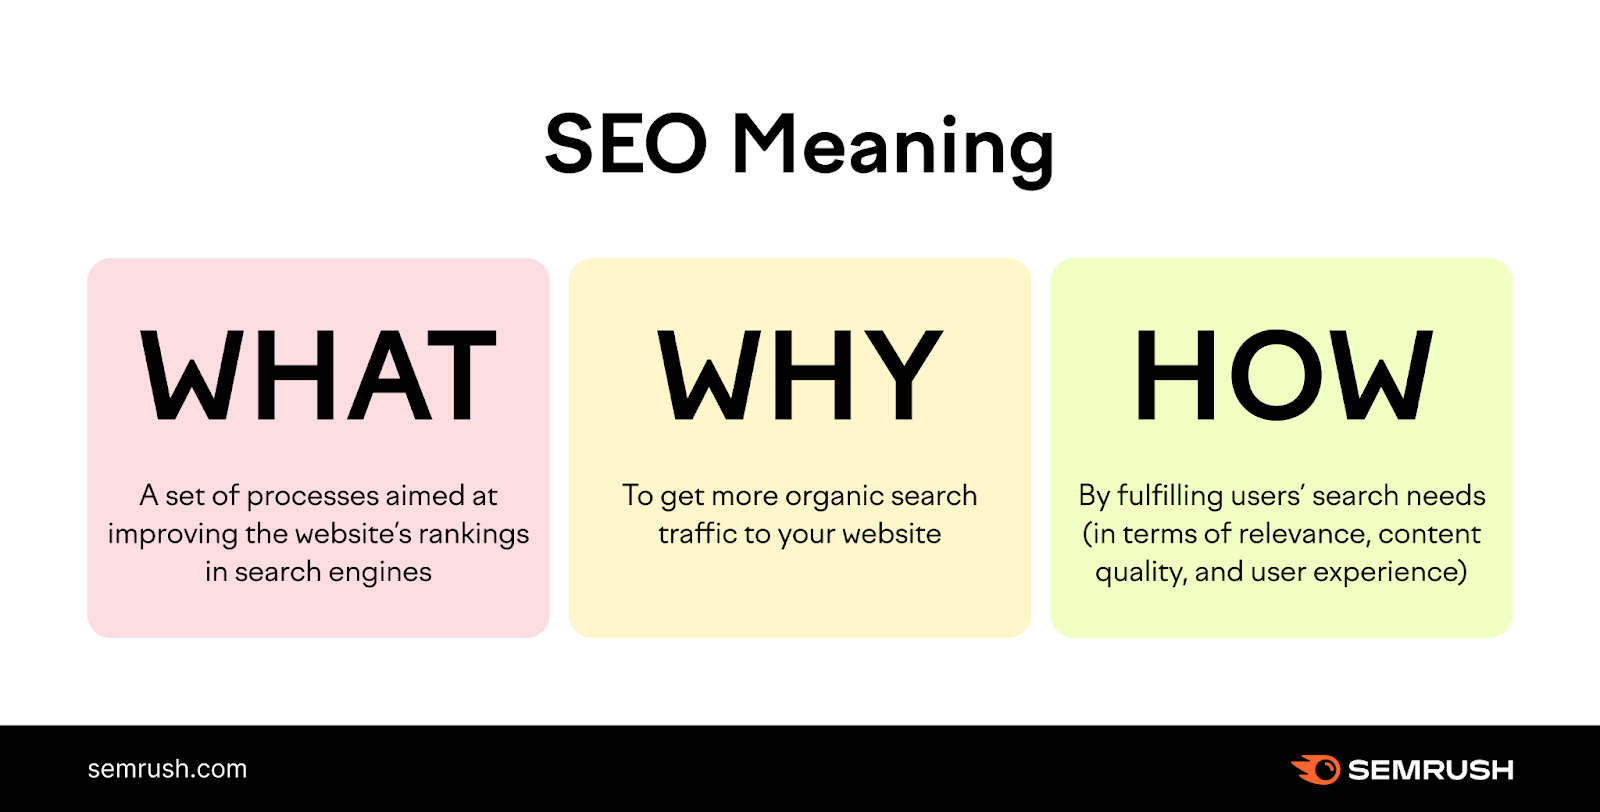 SEO Meaning: the what, why and how of SEO